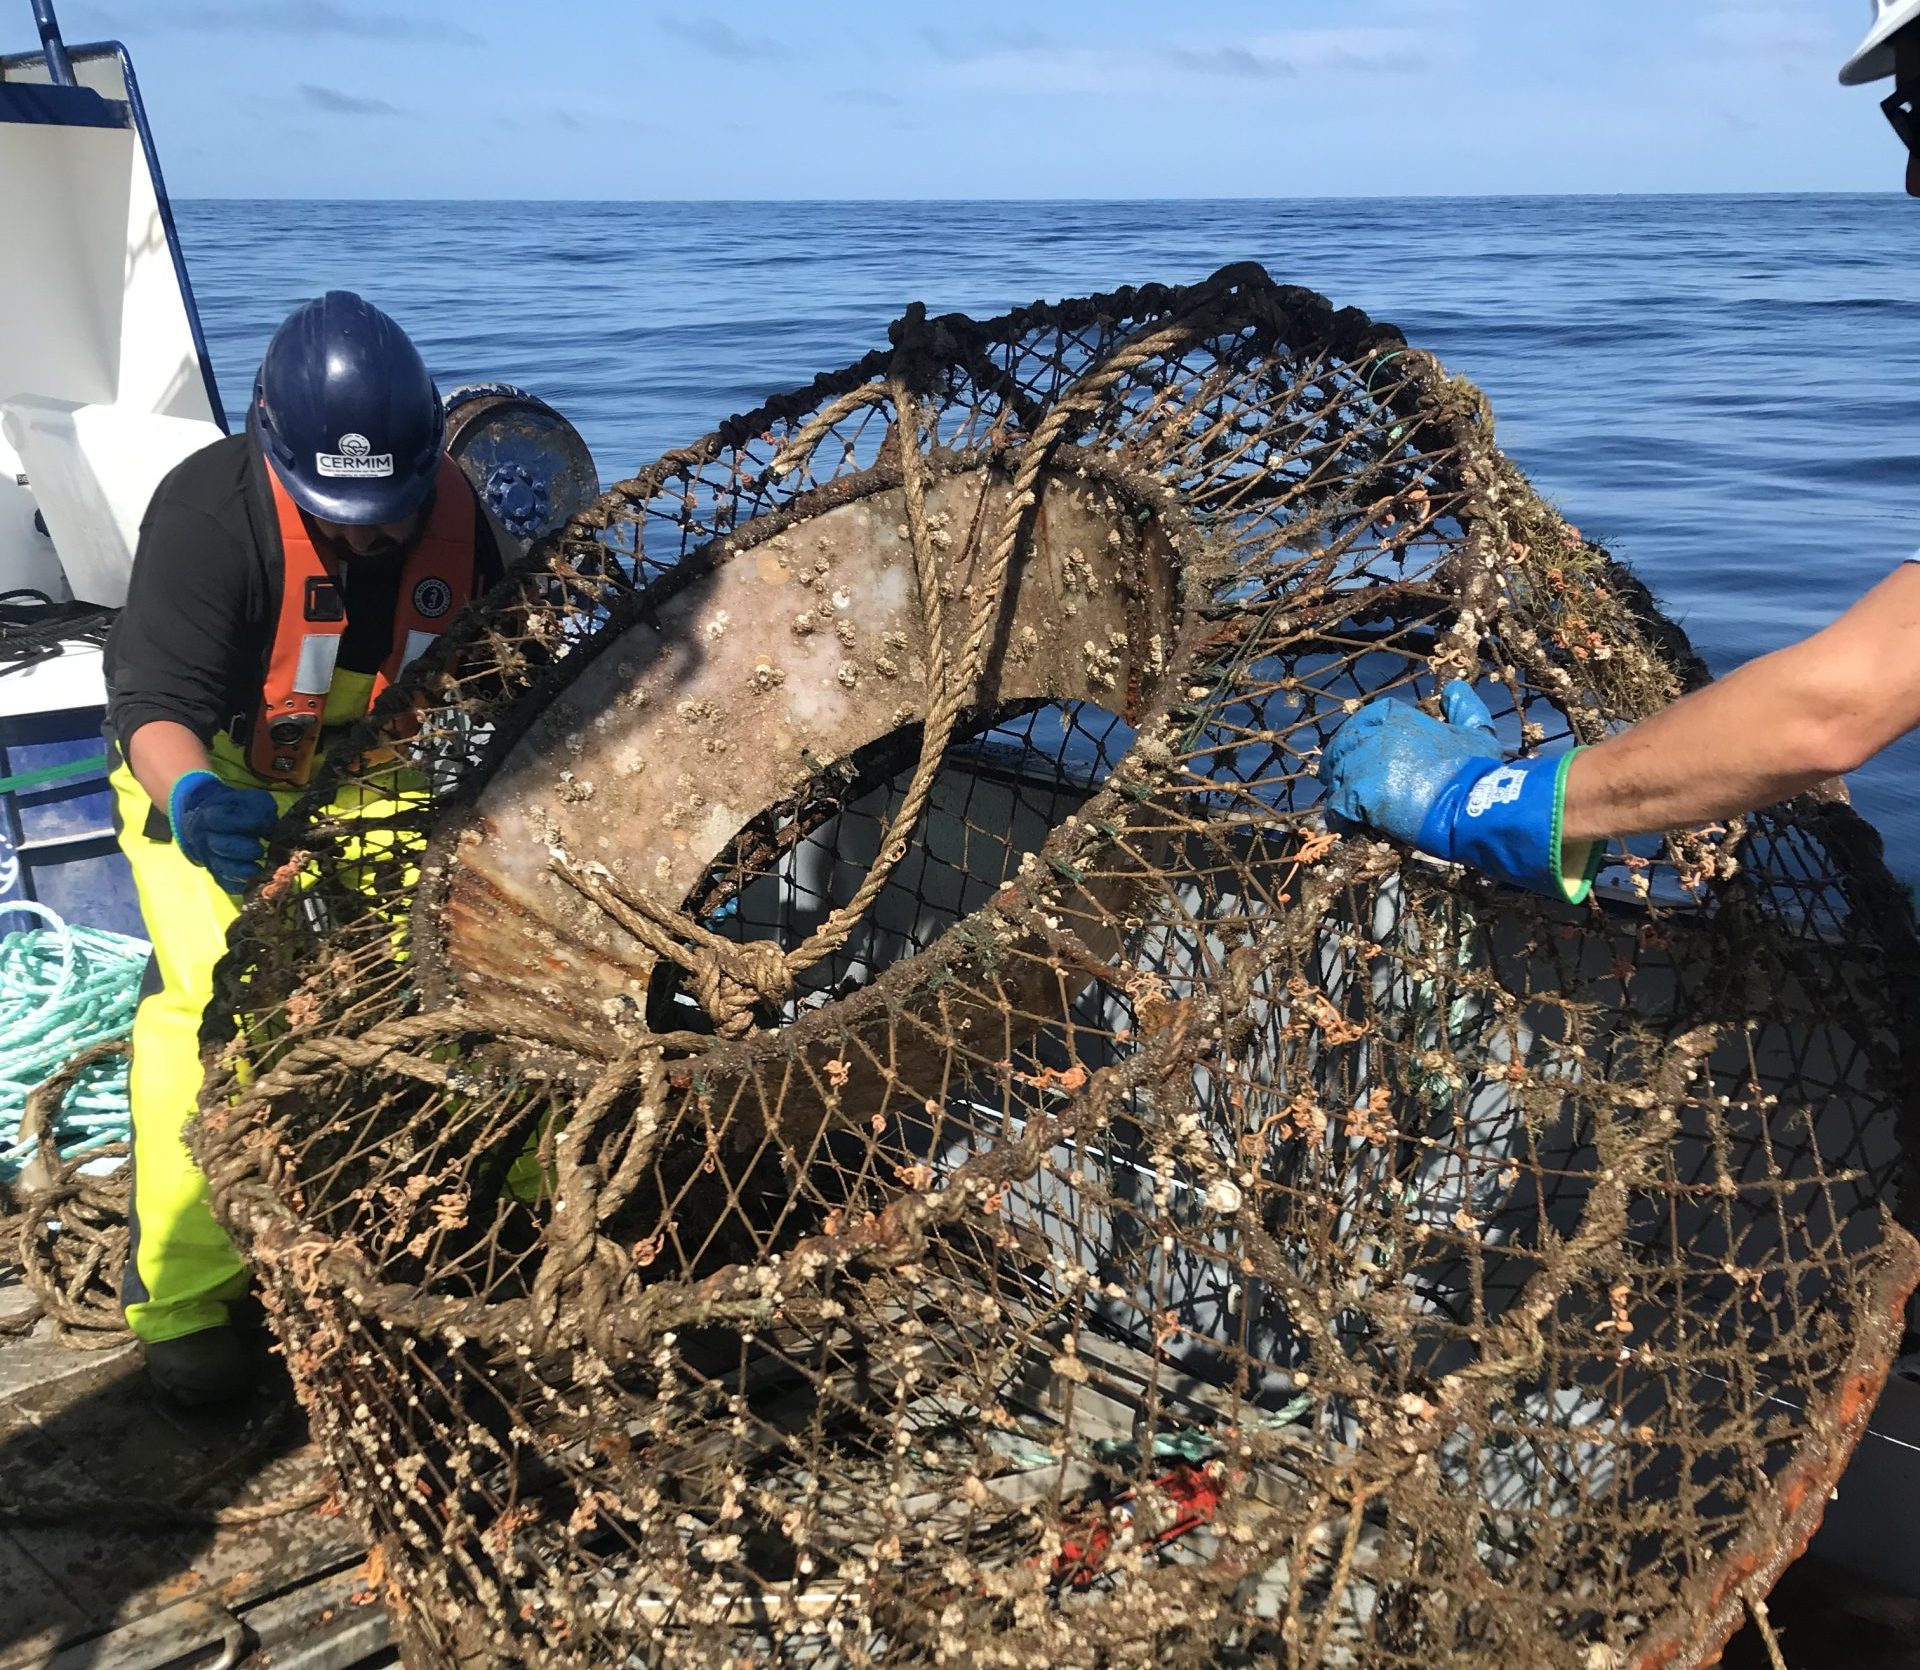 CERMIM refines its technique for recovering ghost fishing gear - CFIM